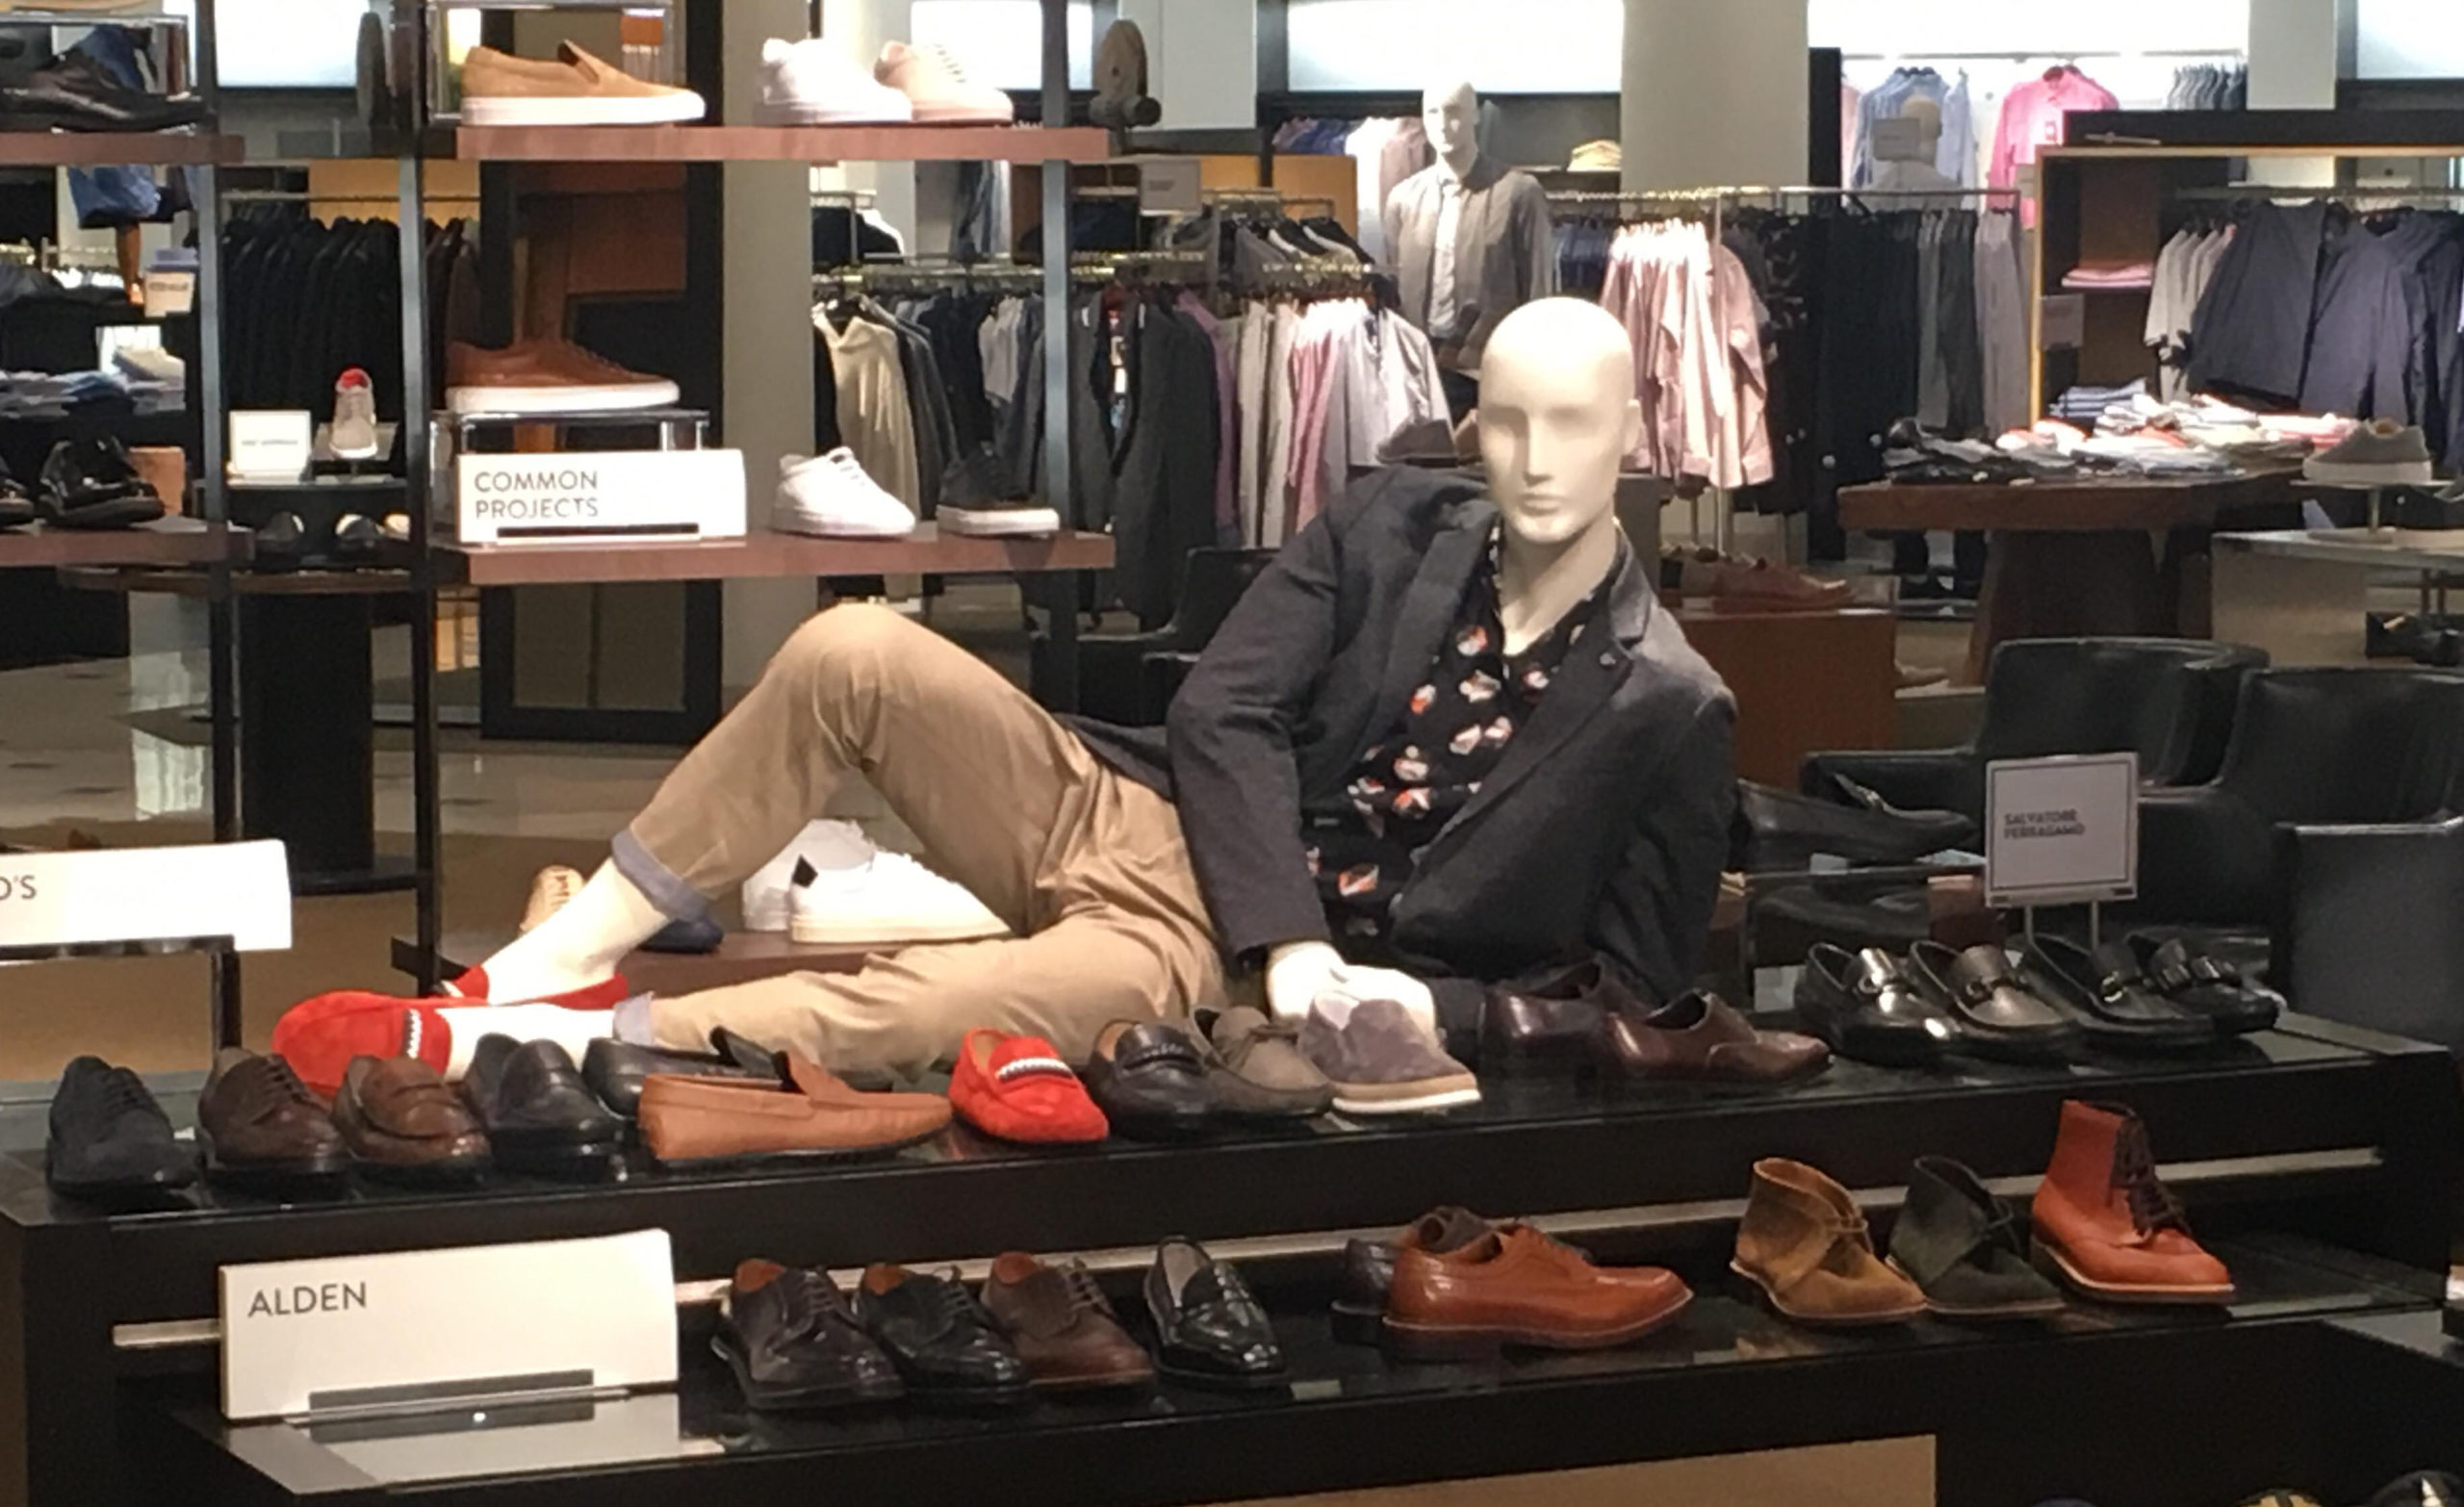 To Understand Twitch's New Dress Code, I Went To A Mall